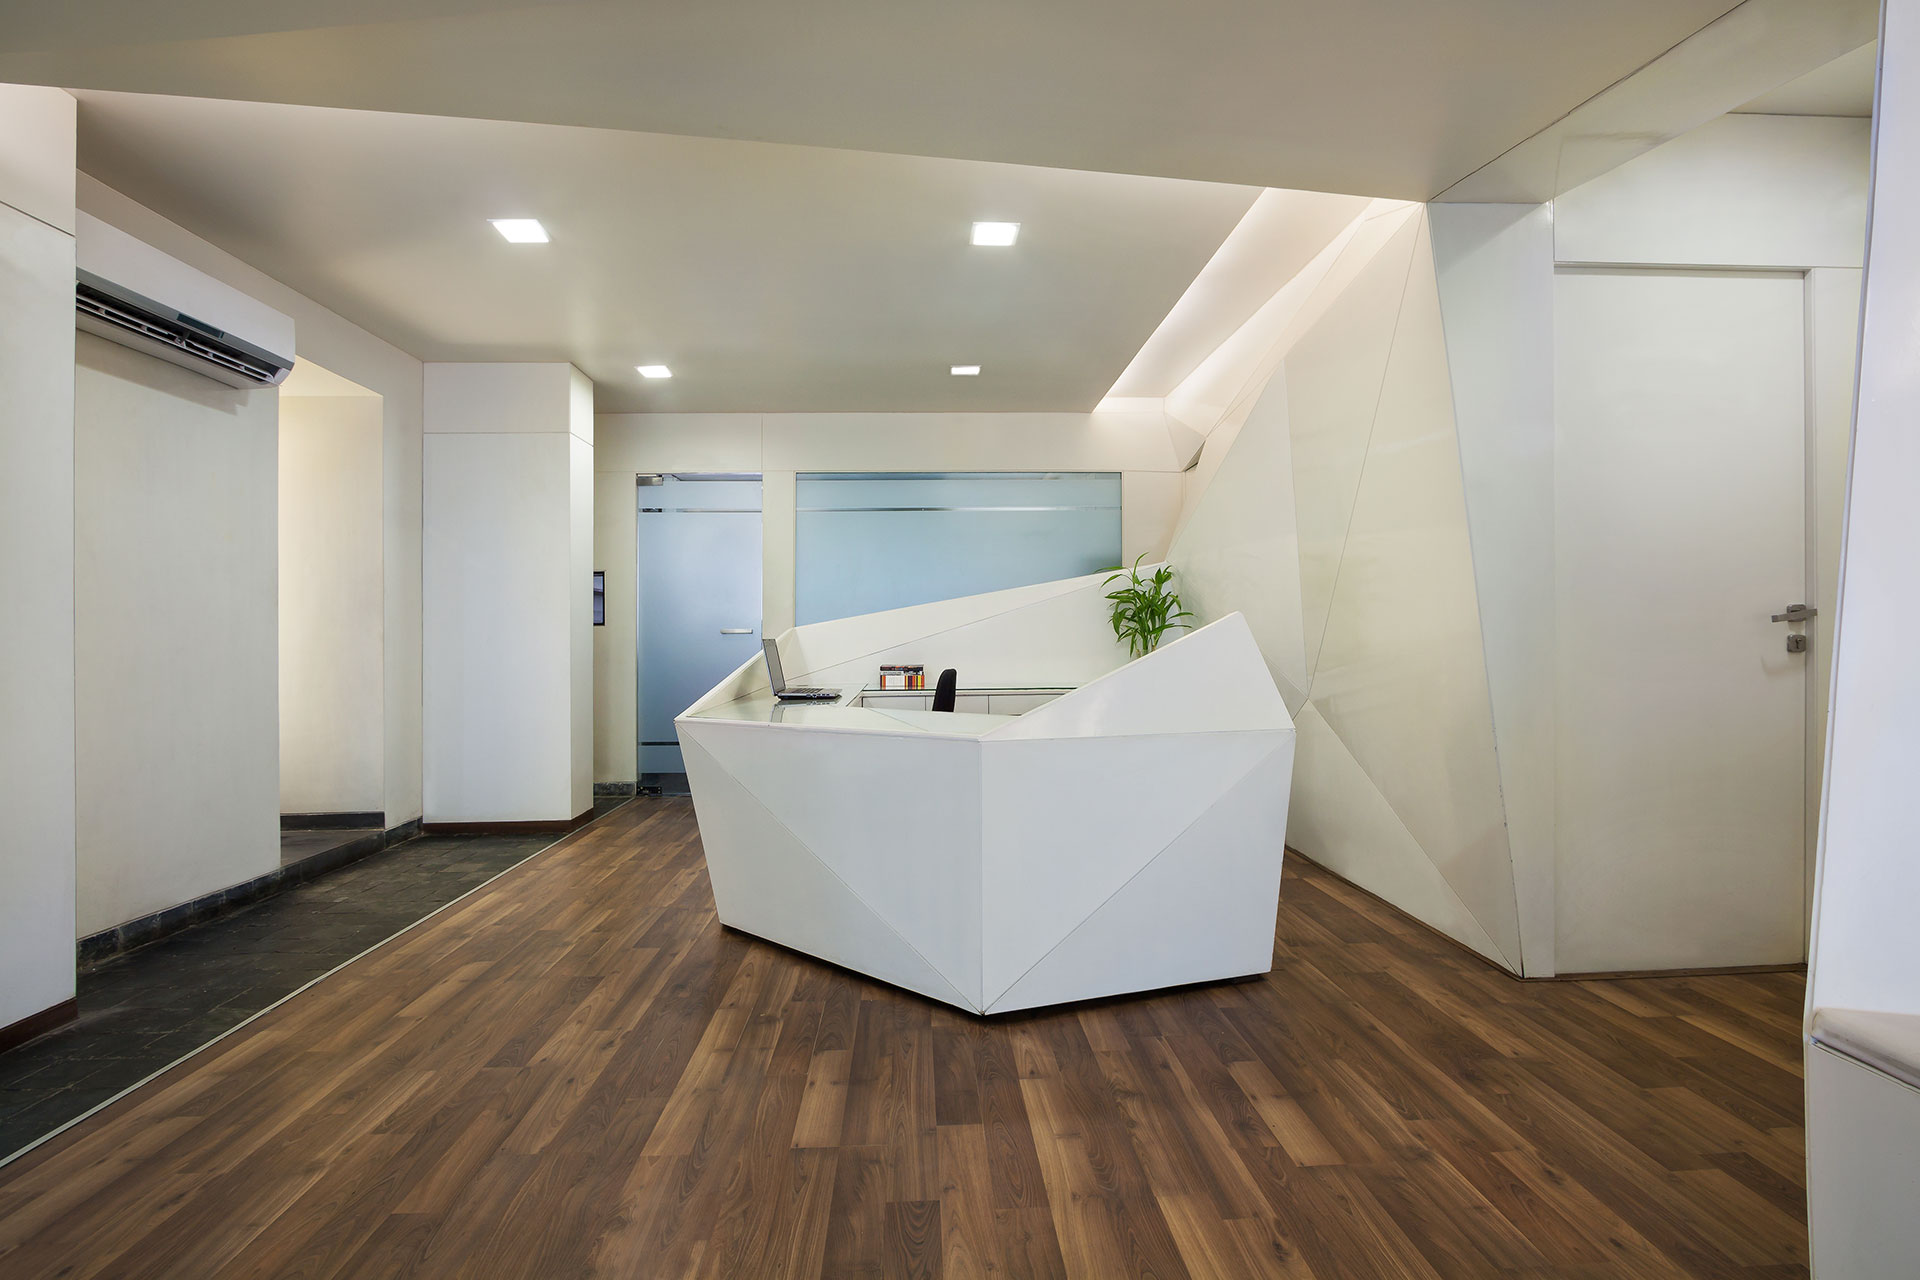 The main public space is surrounded by the various rooms that house the numerous functions that the clinic requires.